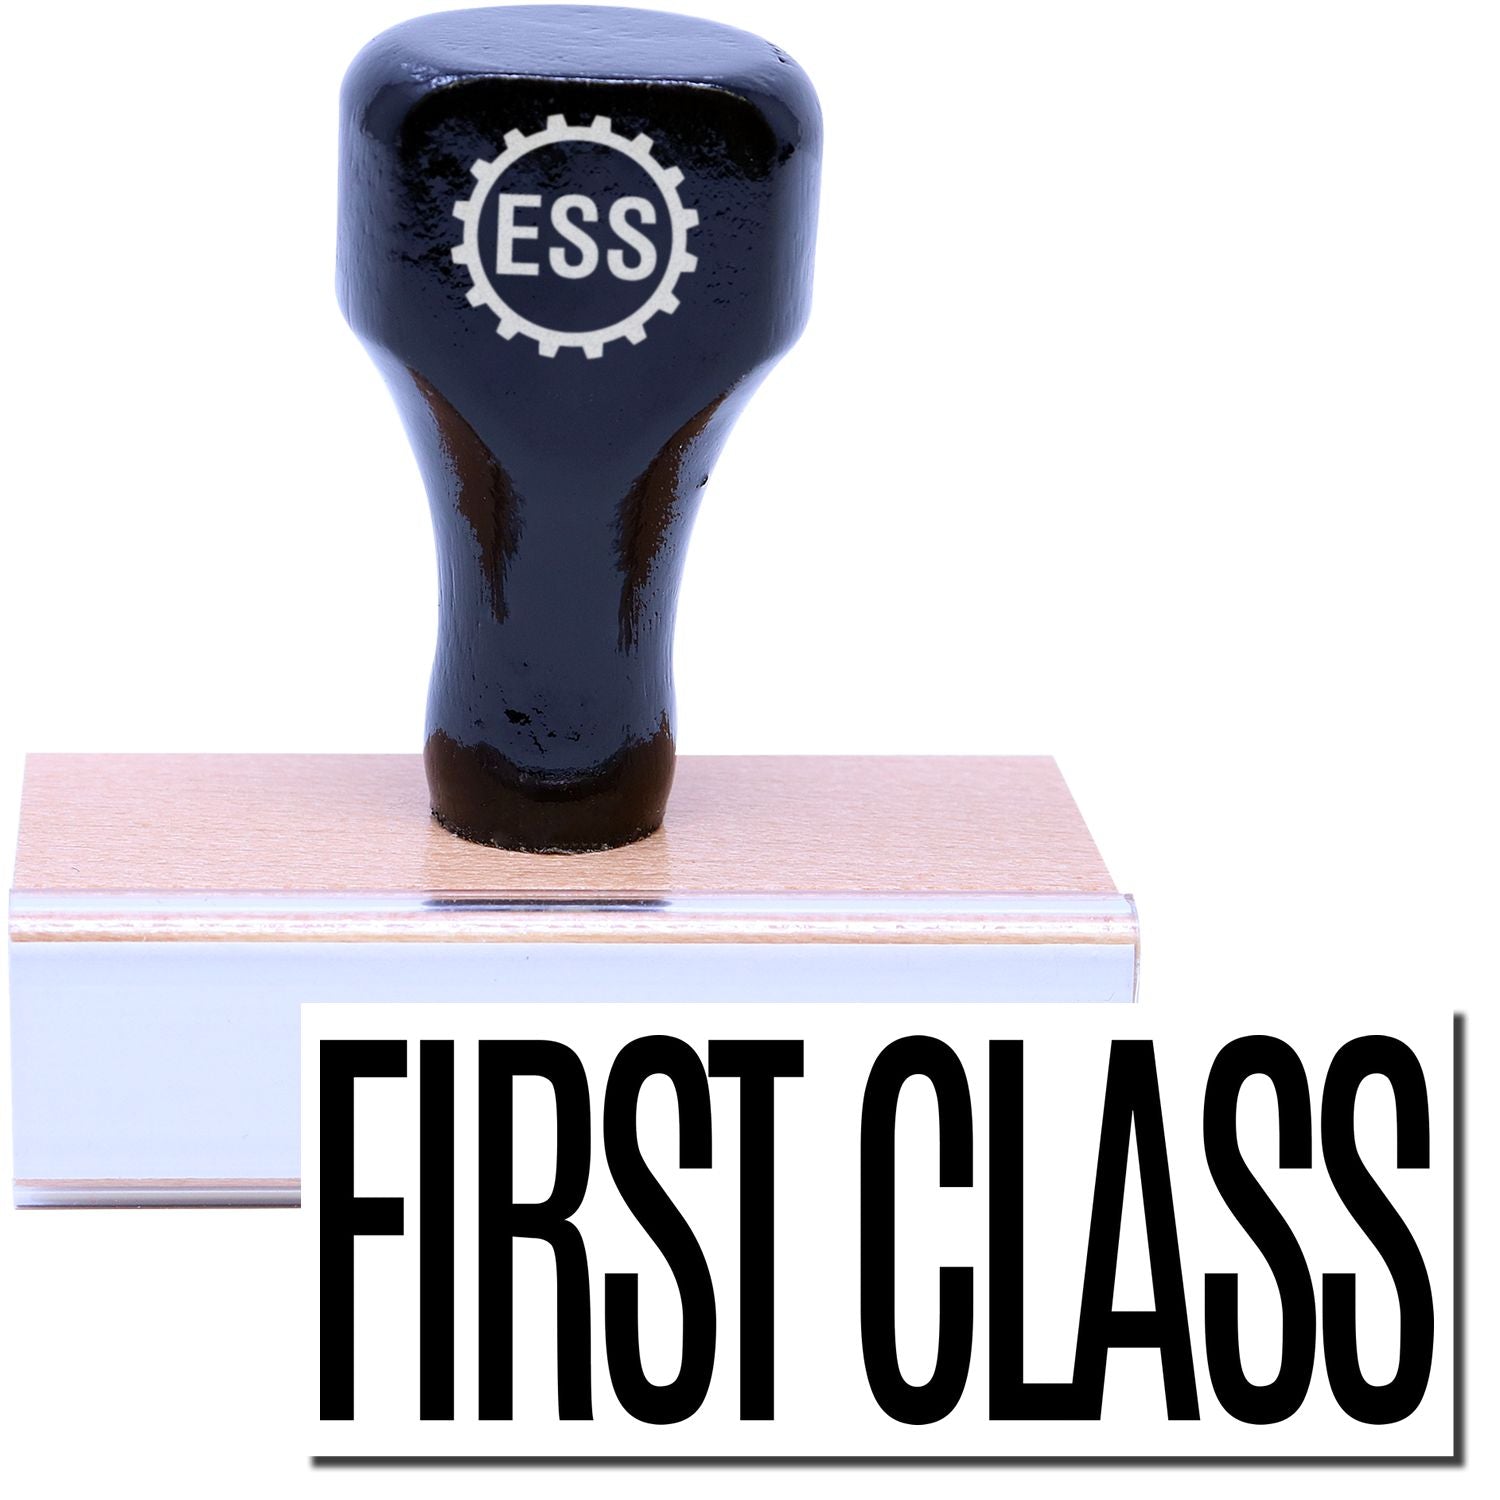 A stock office rubber stamp with a stamped image showing how the text "FIRST CLASS" in a large font is displayed after stamping.